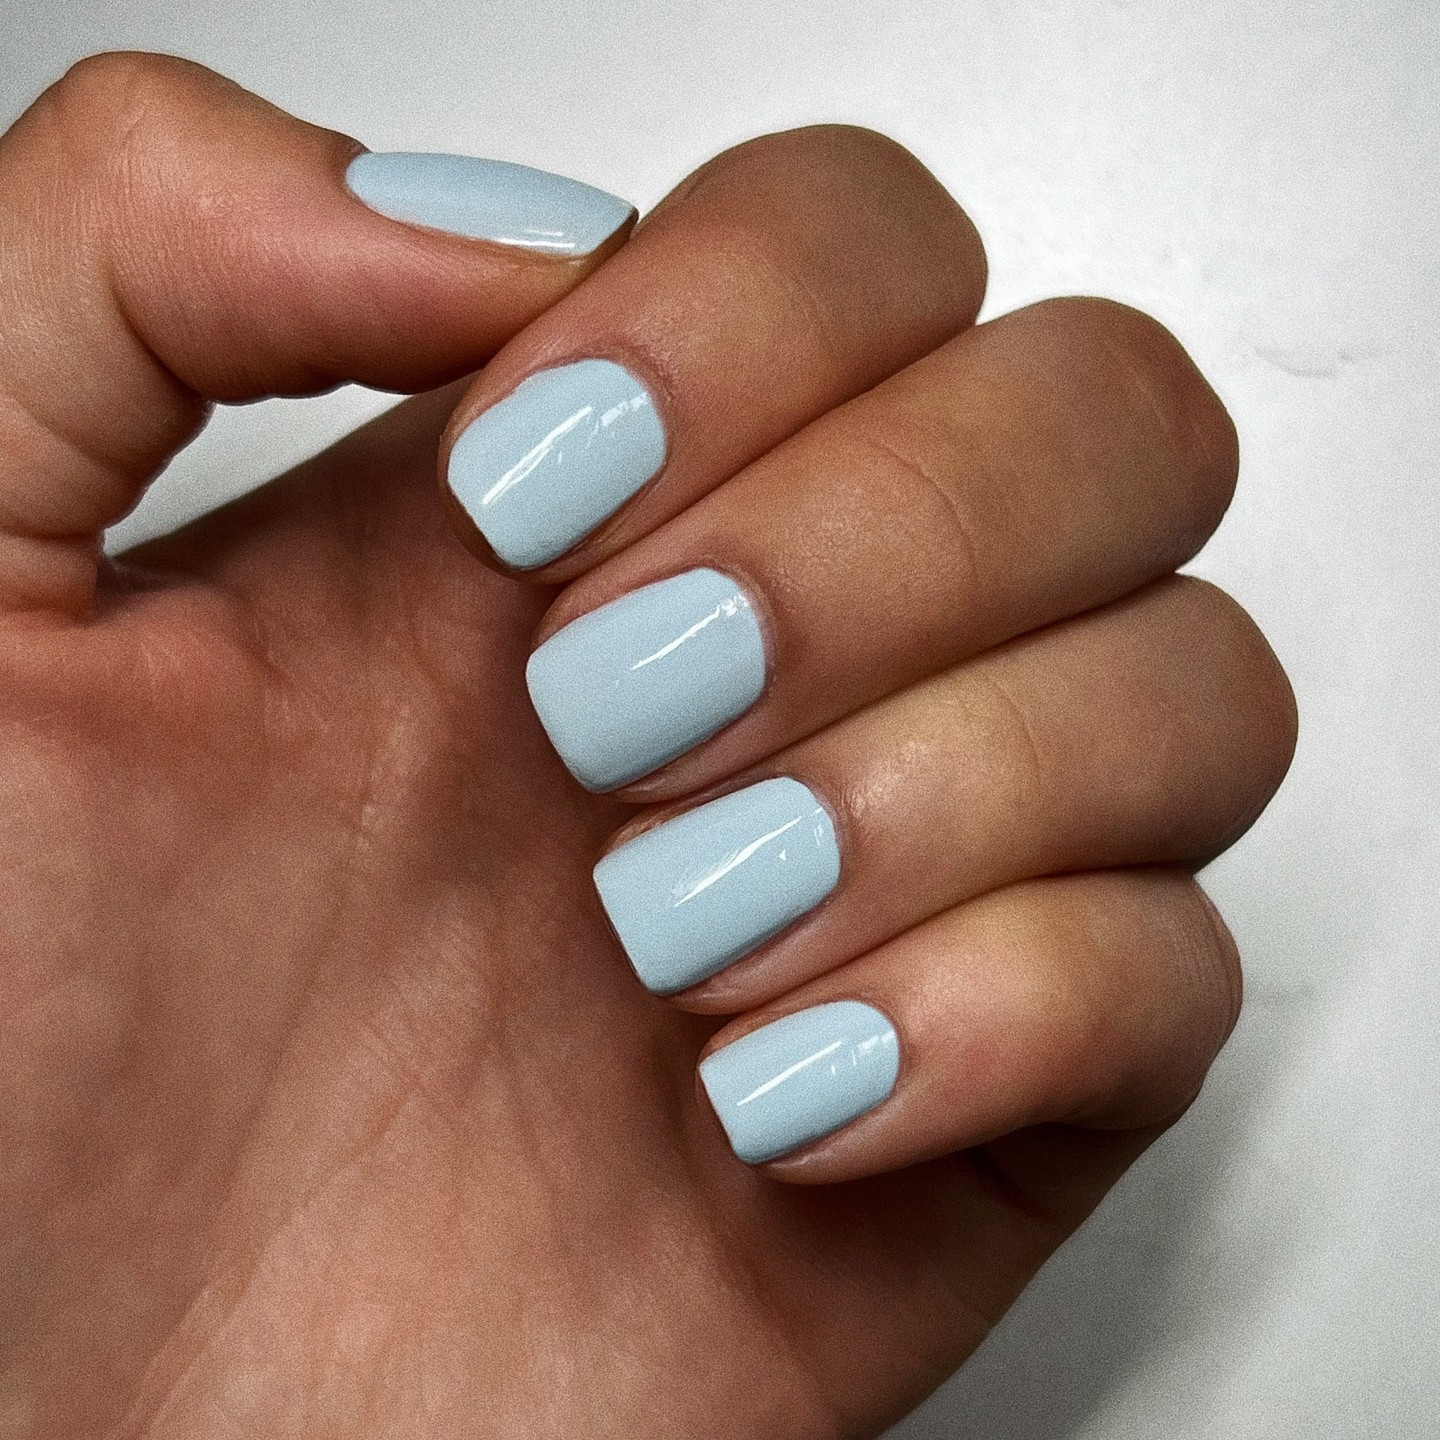 Light blue nail polish suits well with any nail shape and length. So, even if you prefer to have short nails, light blue nail polish will look amazing on you.